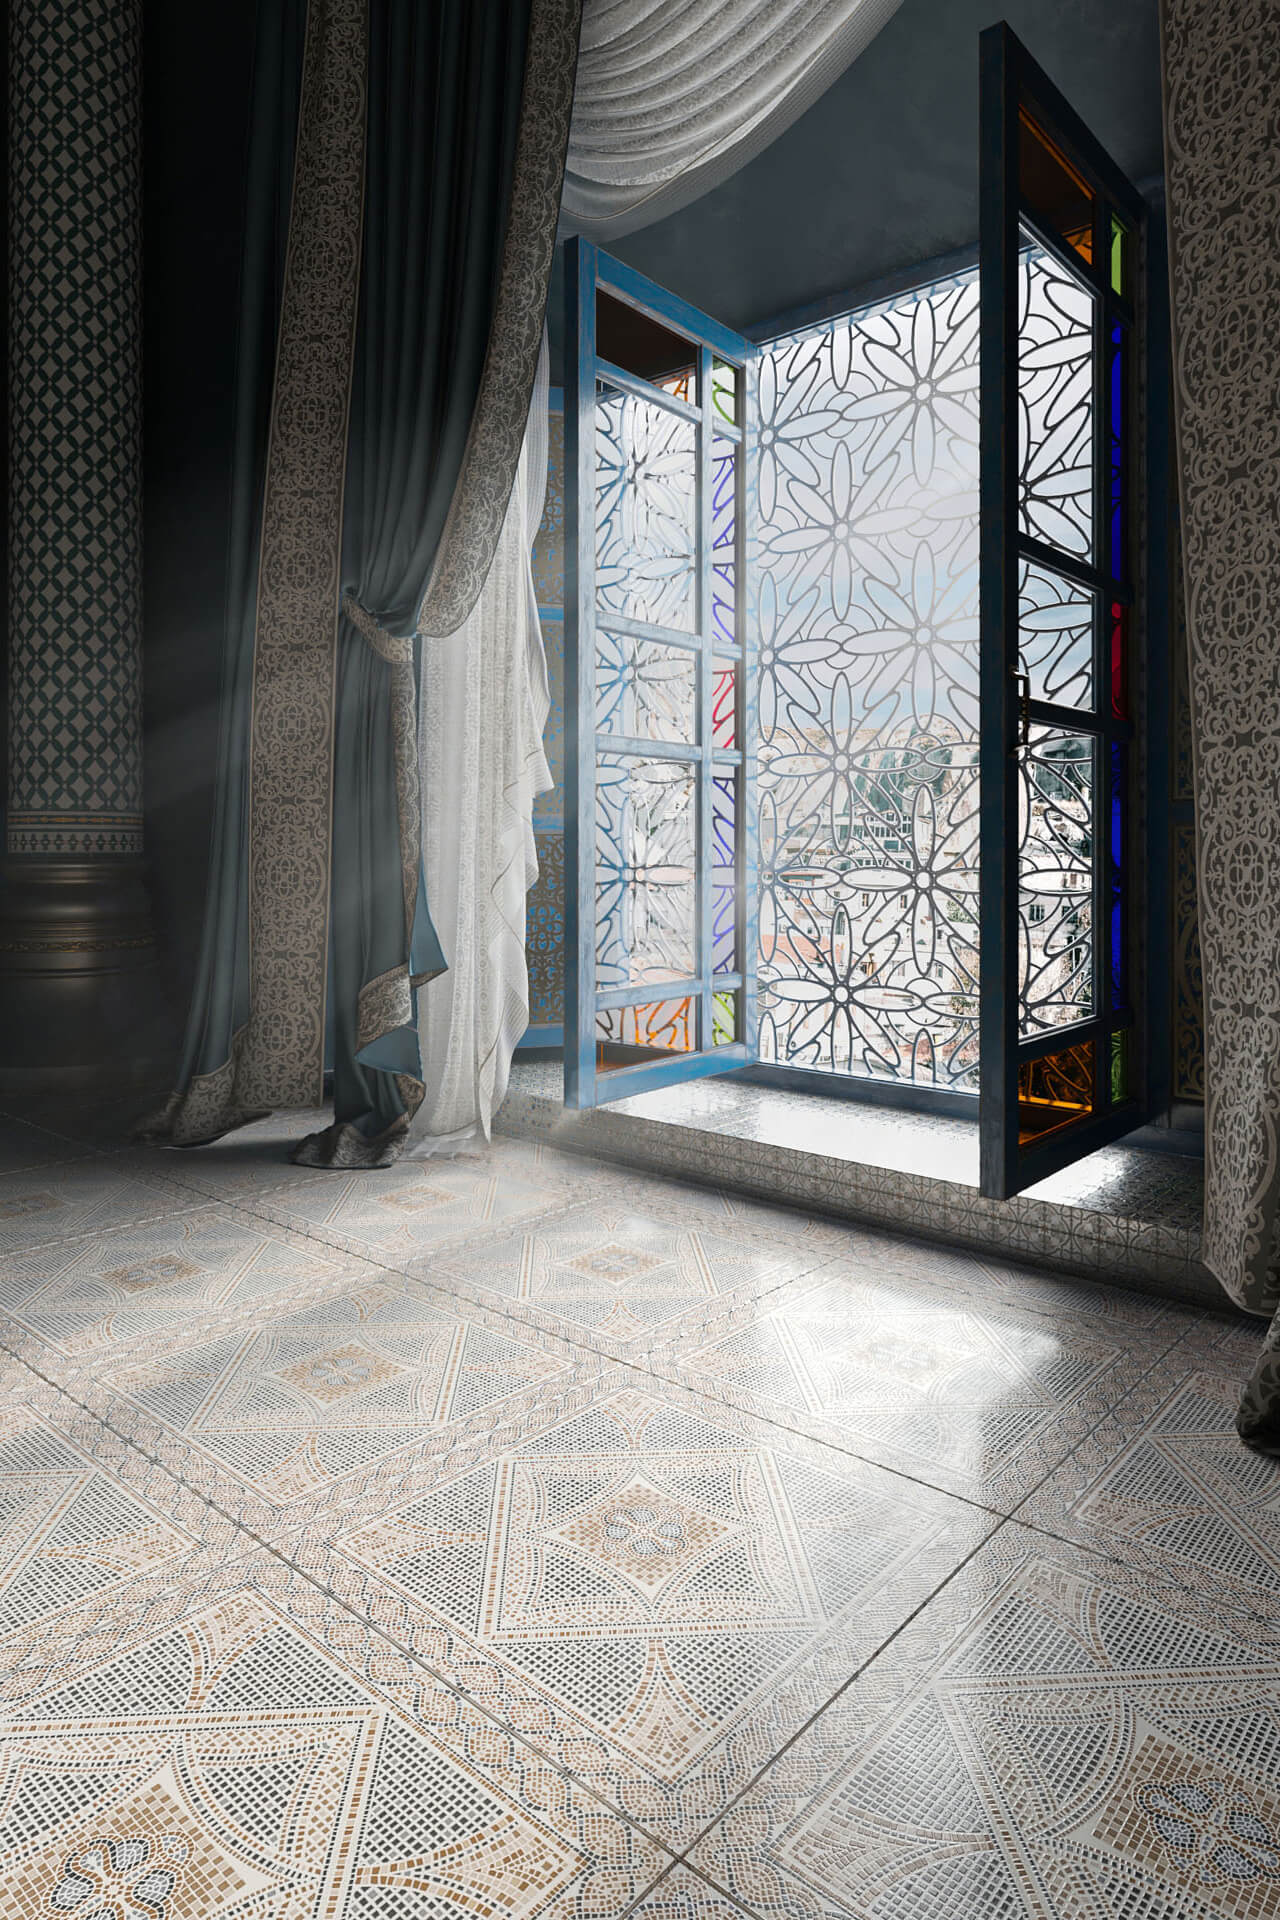 3D Visualization of Tiles with Intricate Pattern